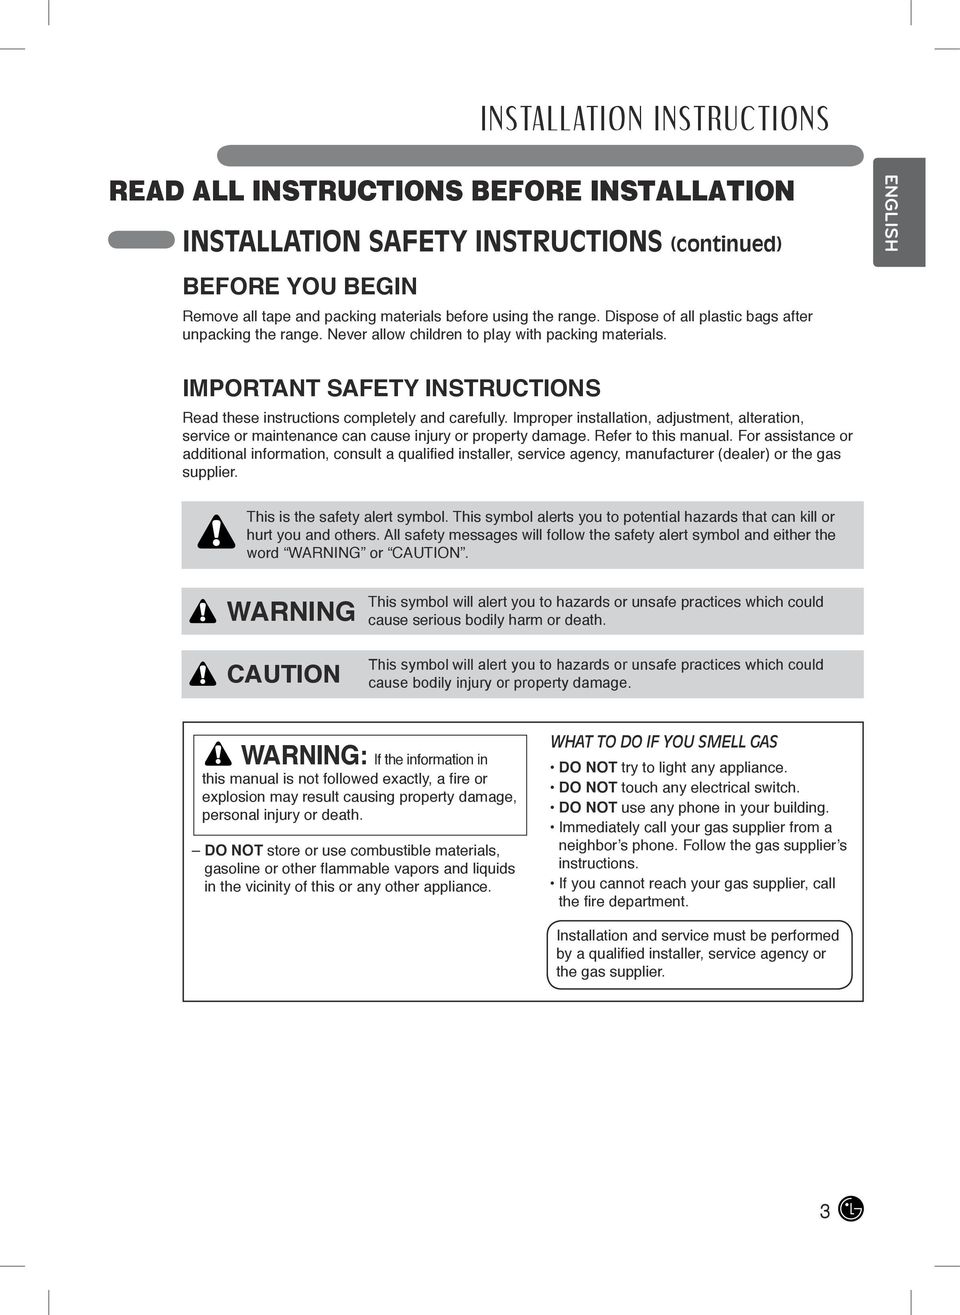 Improper installation, adjustment, alteration, service or maintenance can cause injury or property damage. Refer to this manual.